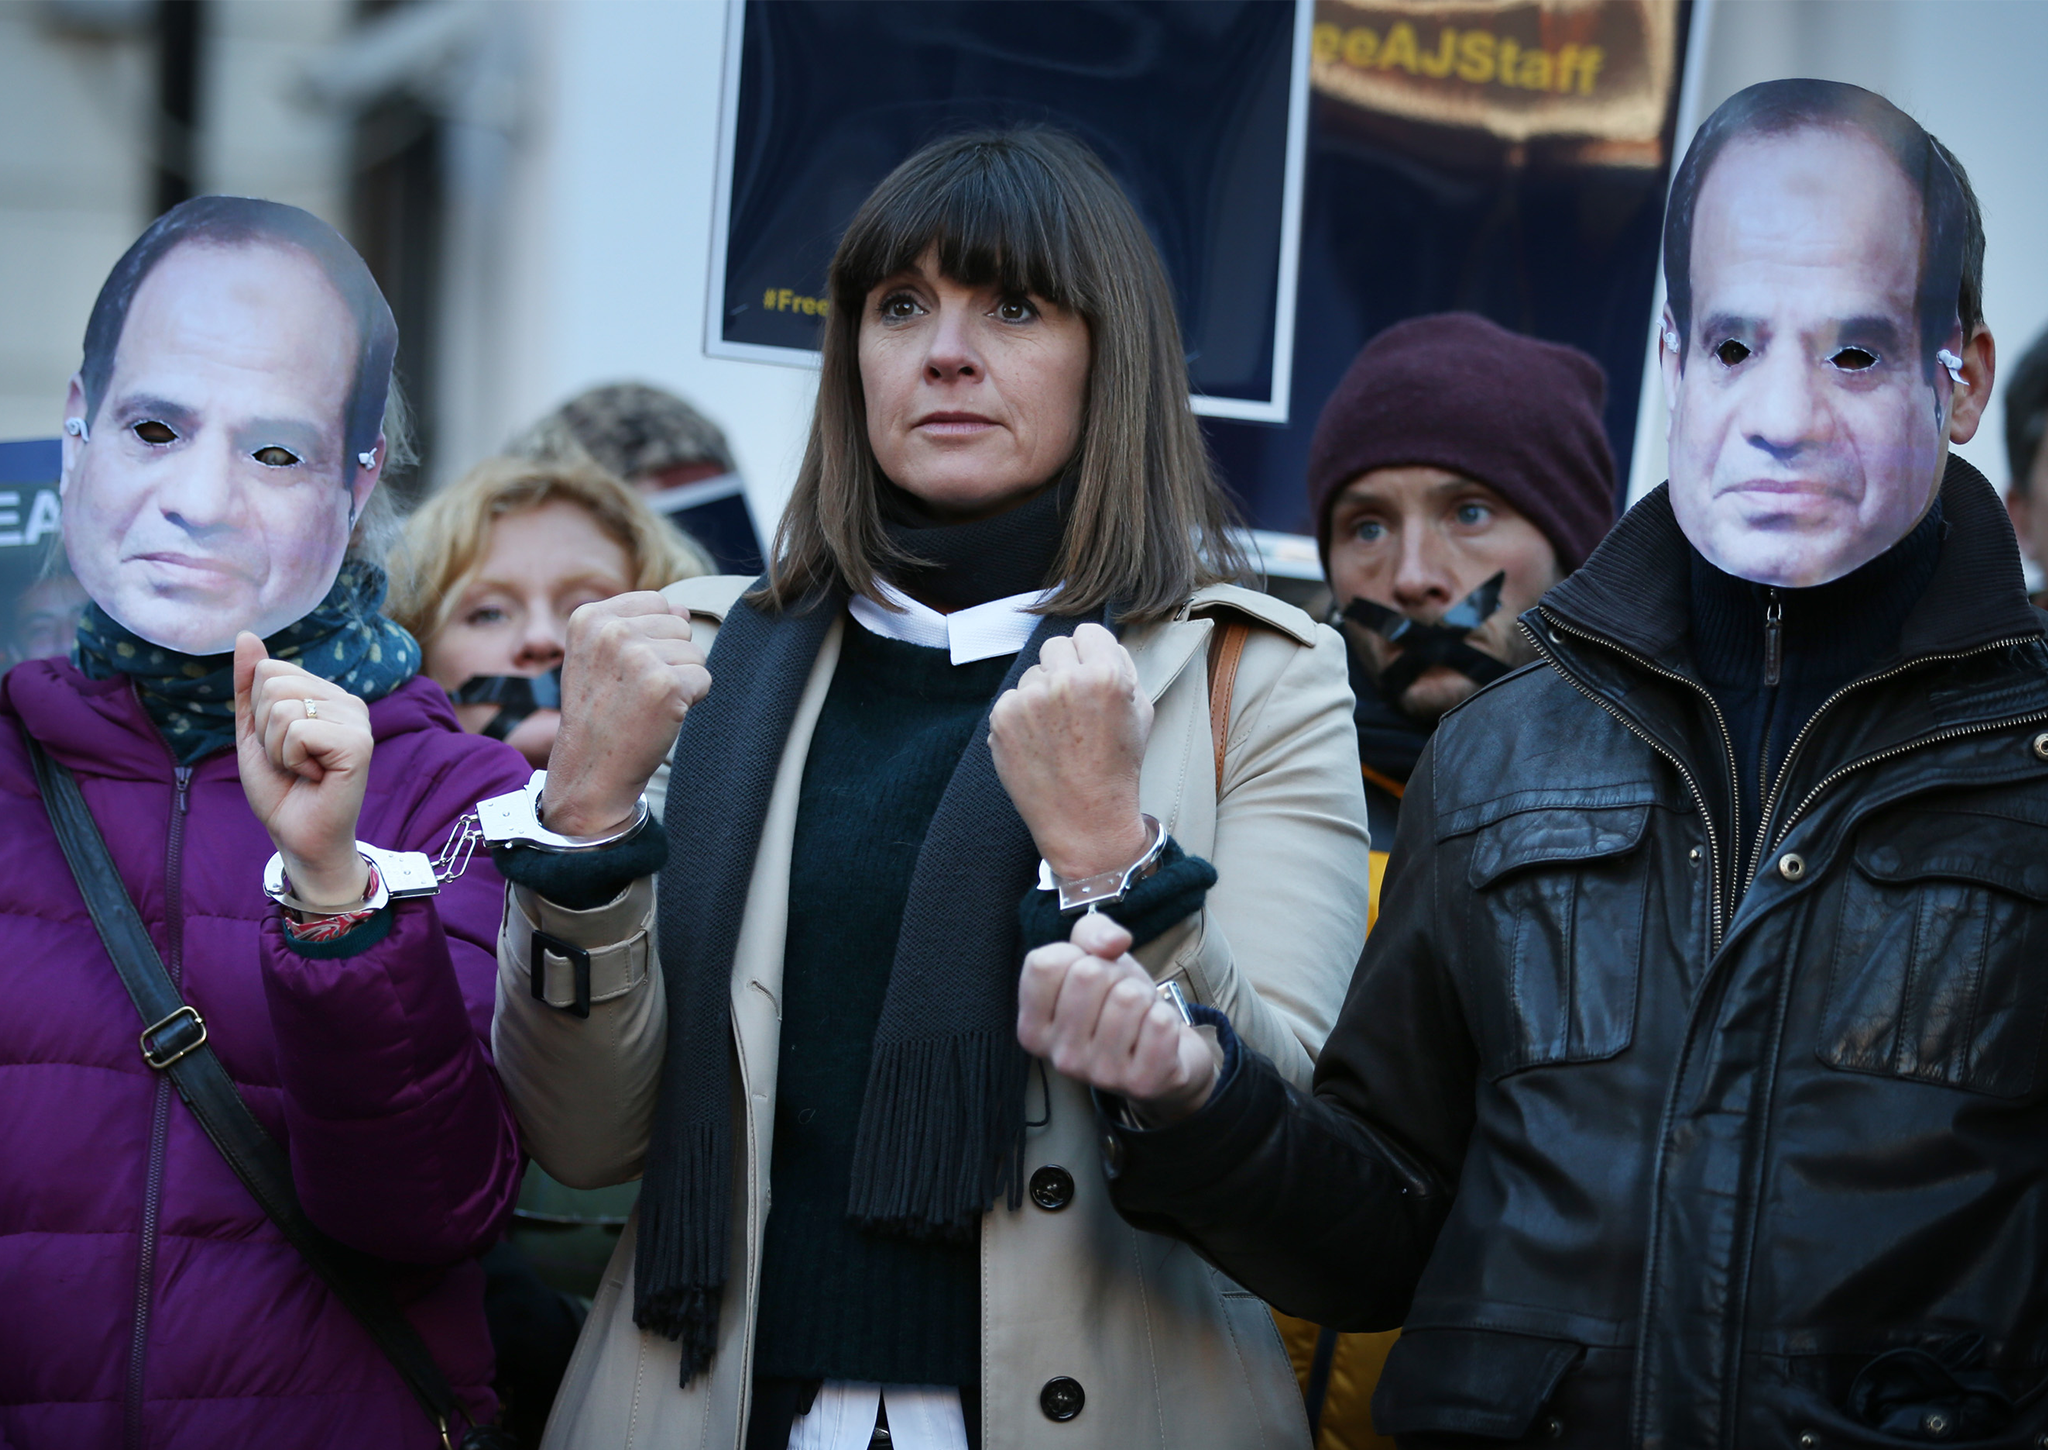 Sue Turton stands handcuffed to fellow supporters, wearing masks depicting President el-Sisi, as they demonstrate in support of jailed colleagues outside the Egyptian embassy last year